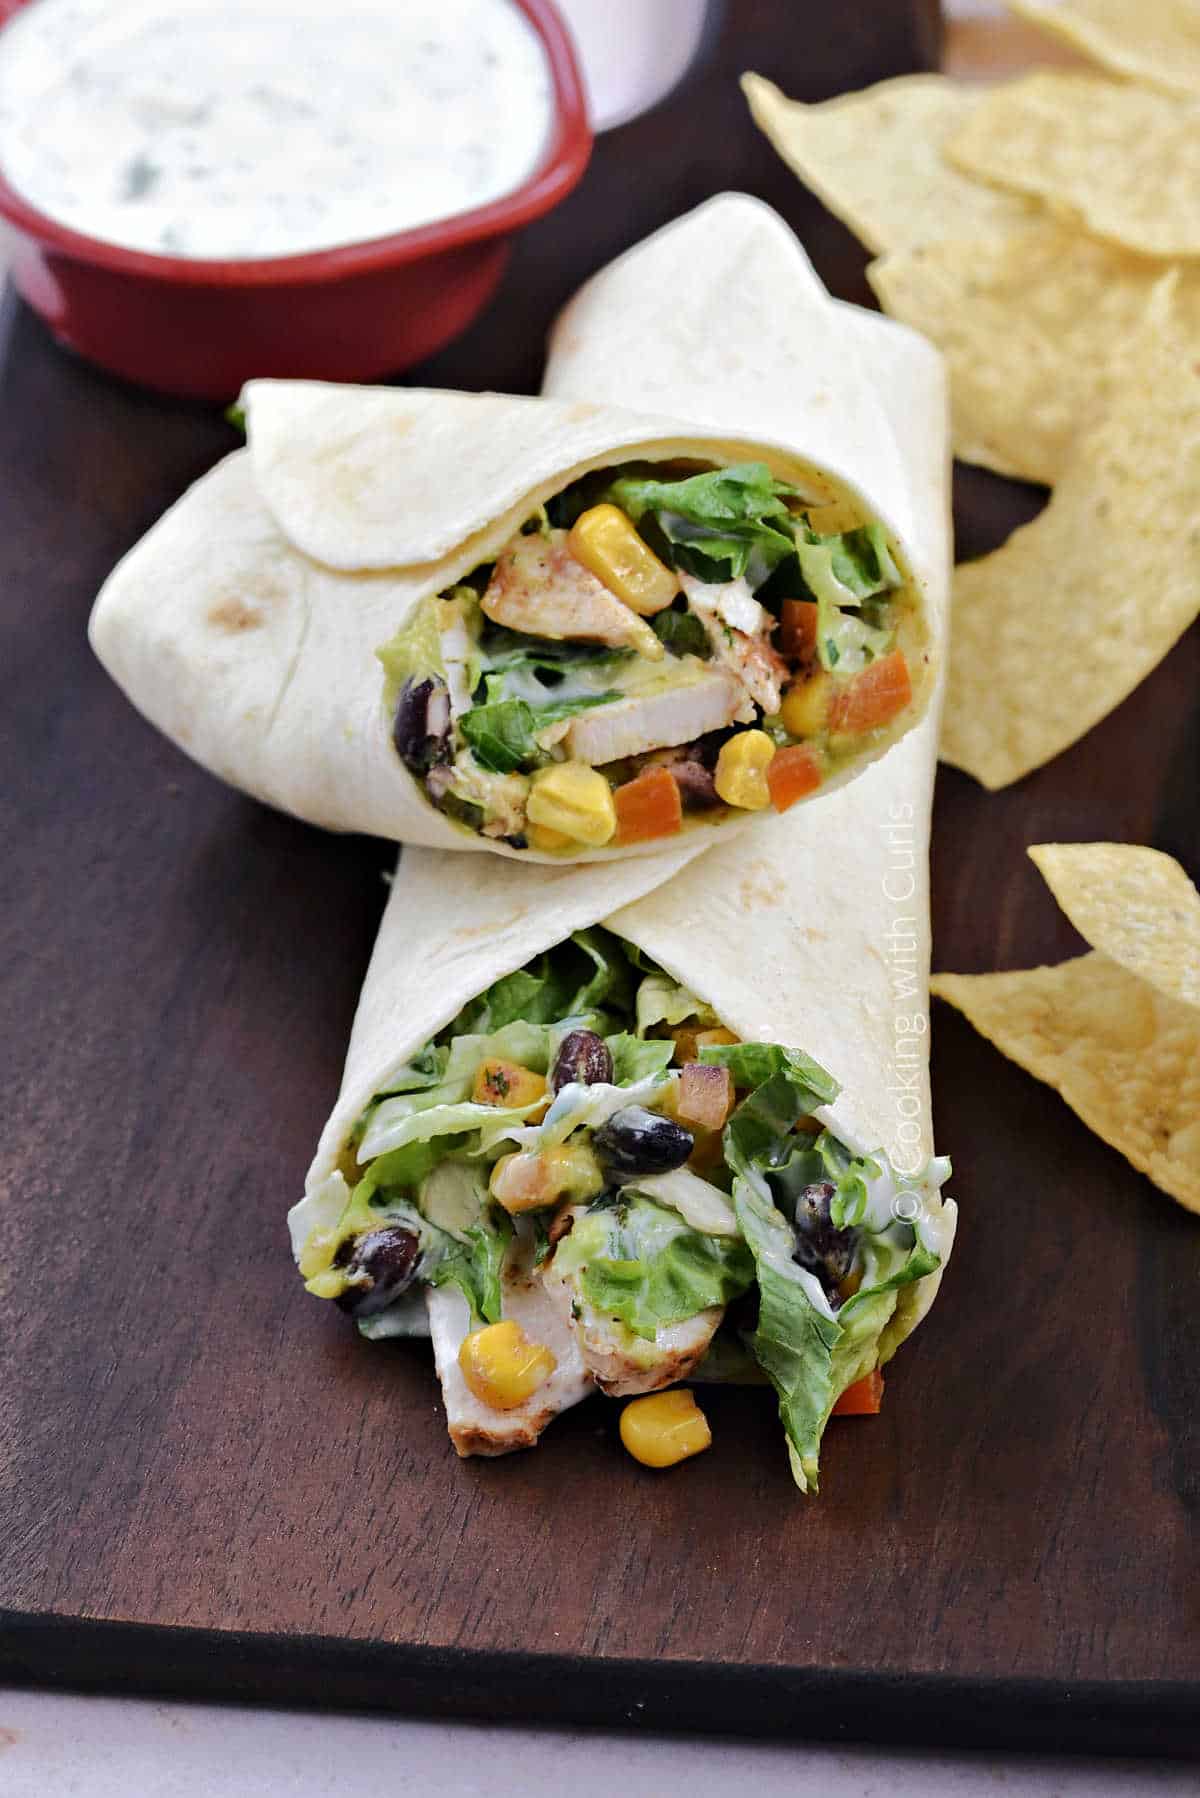 Chicken, corn, black beans, lettuce, and ranch dressing wrapped in a flour tortilla and cut in half on a wood board.